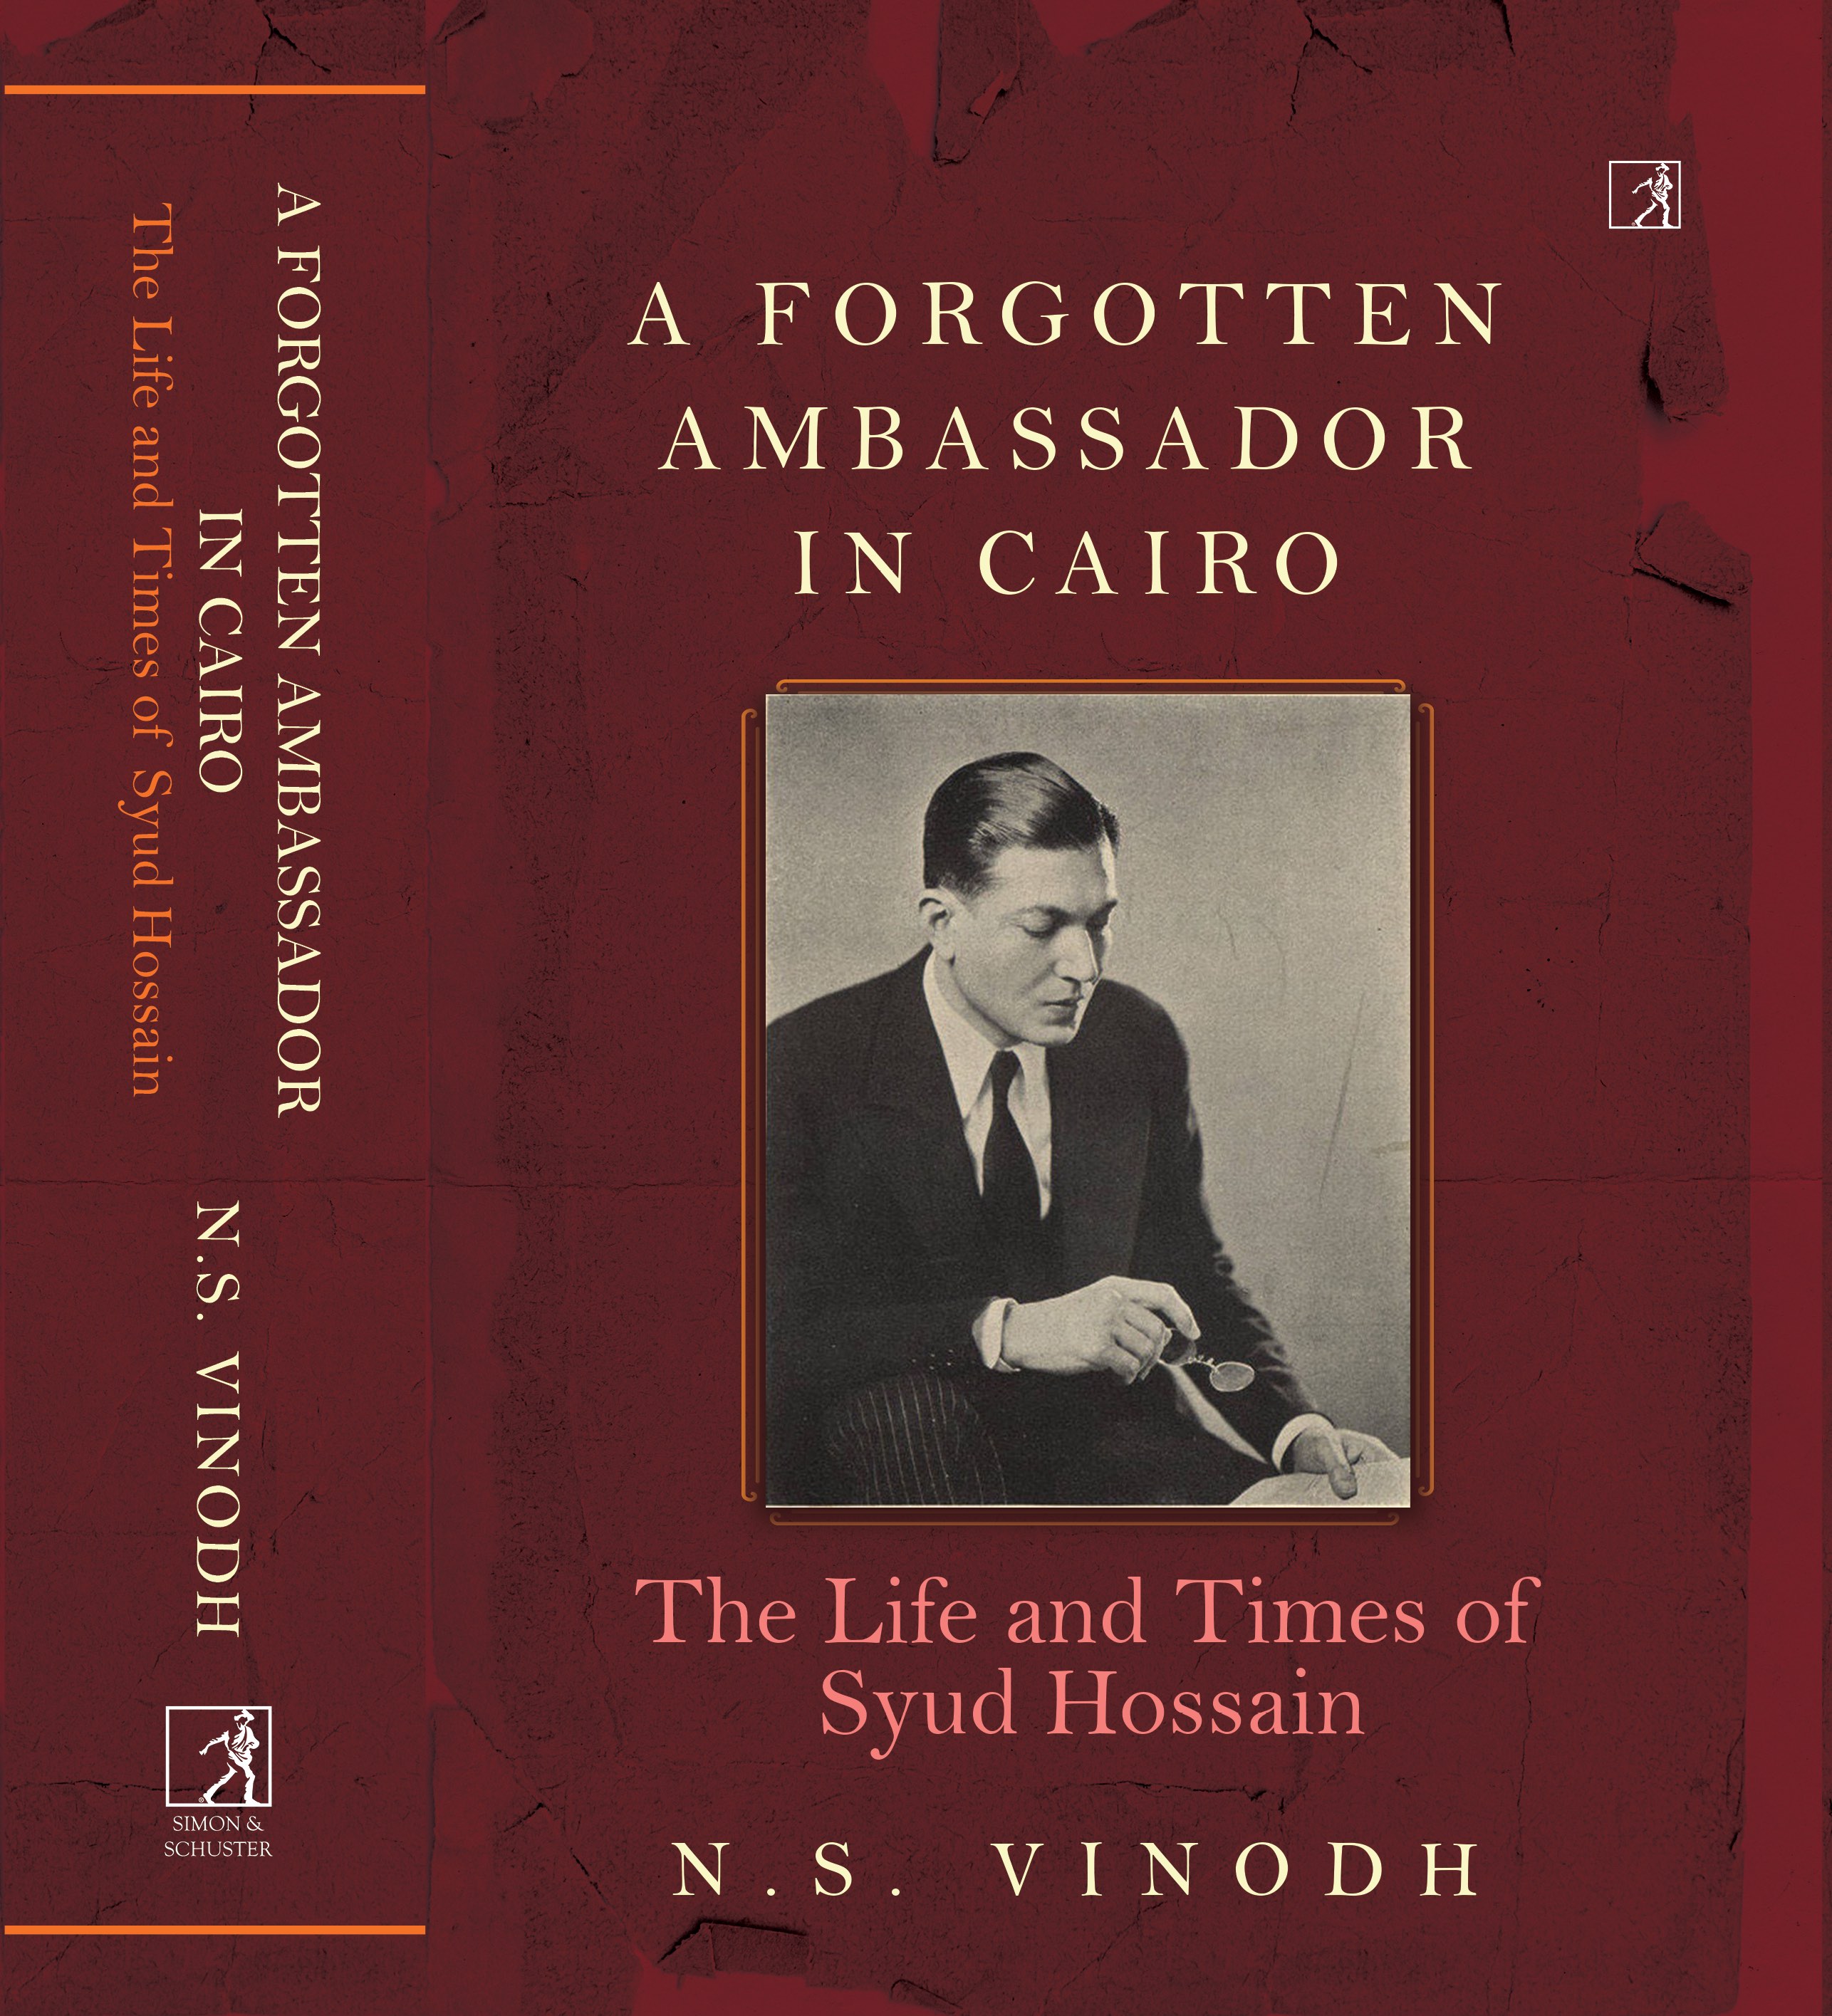 'A Forgotten Ambassador in Cairo - The Life and Times of Syud Hossain'